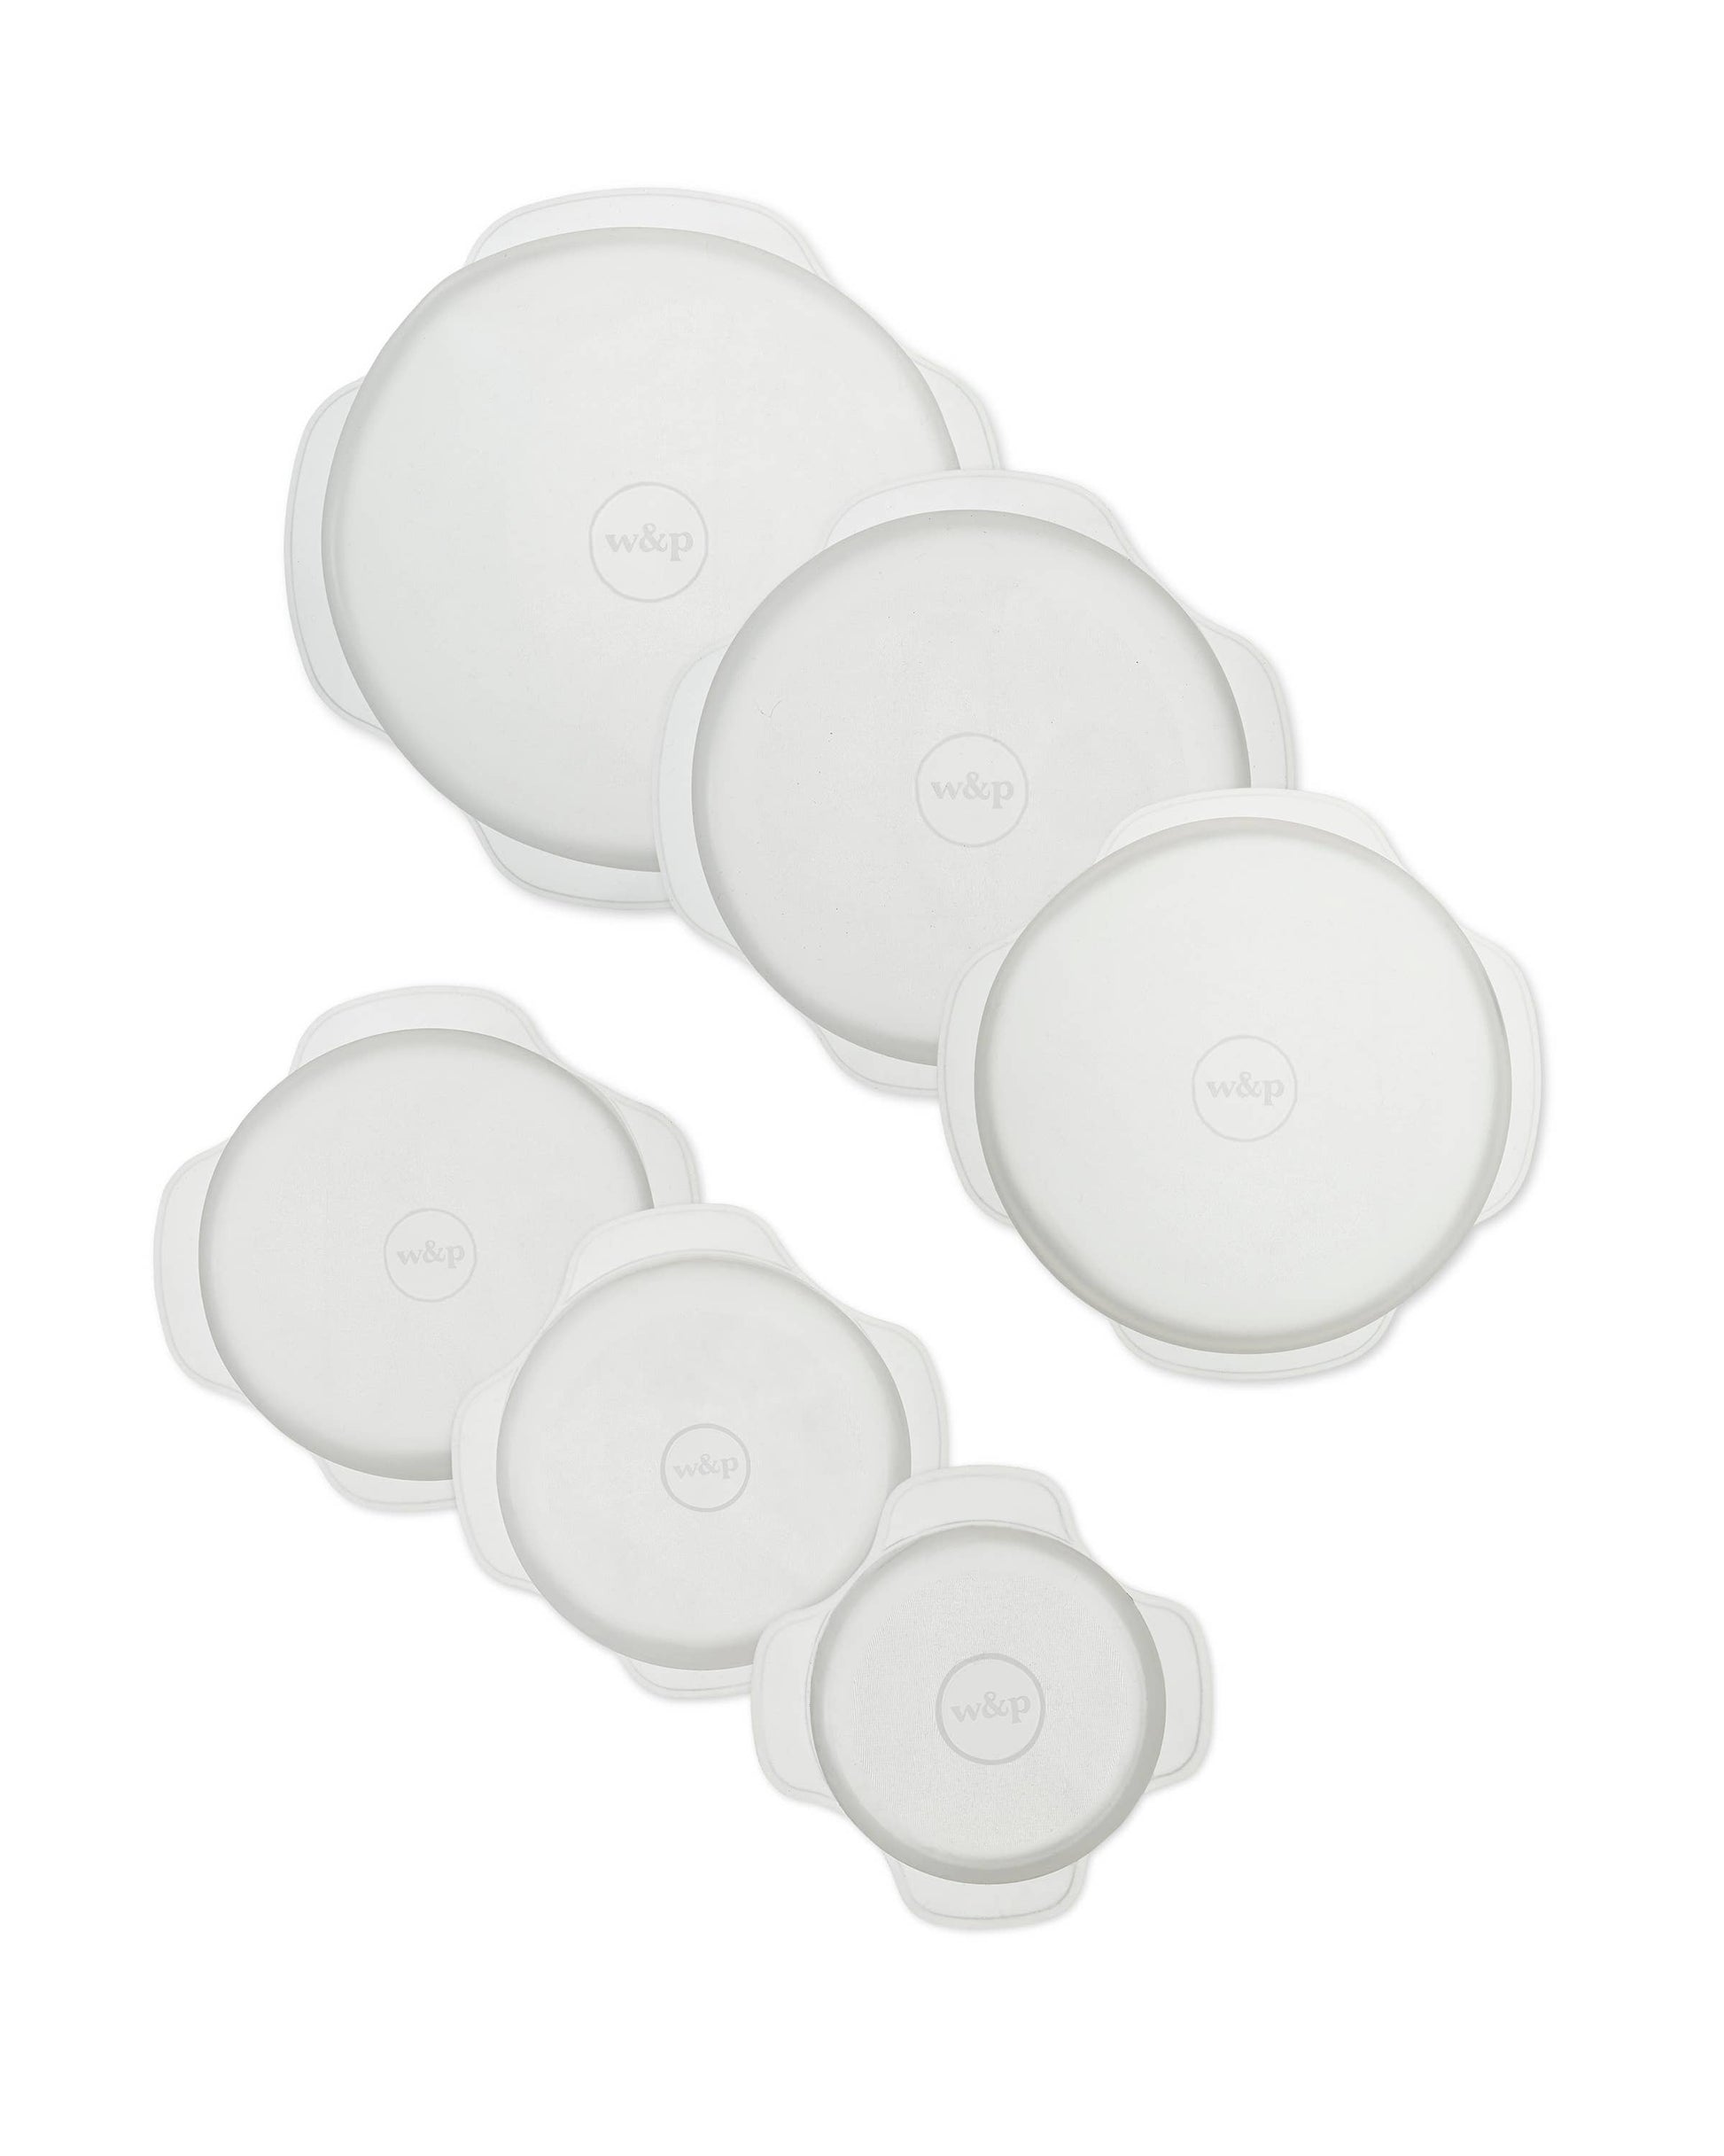 Reusable Silicone Stretch Lids - Set of 6 Assorted Sizes  W&P   -better made easy-eco-friendly-sustainable-gifting